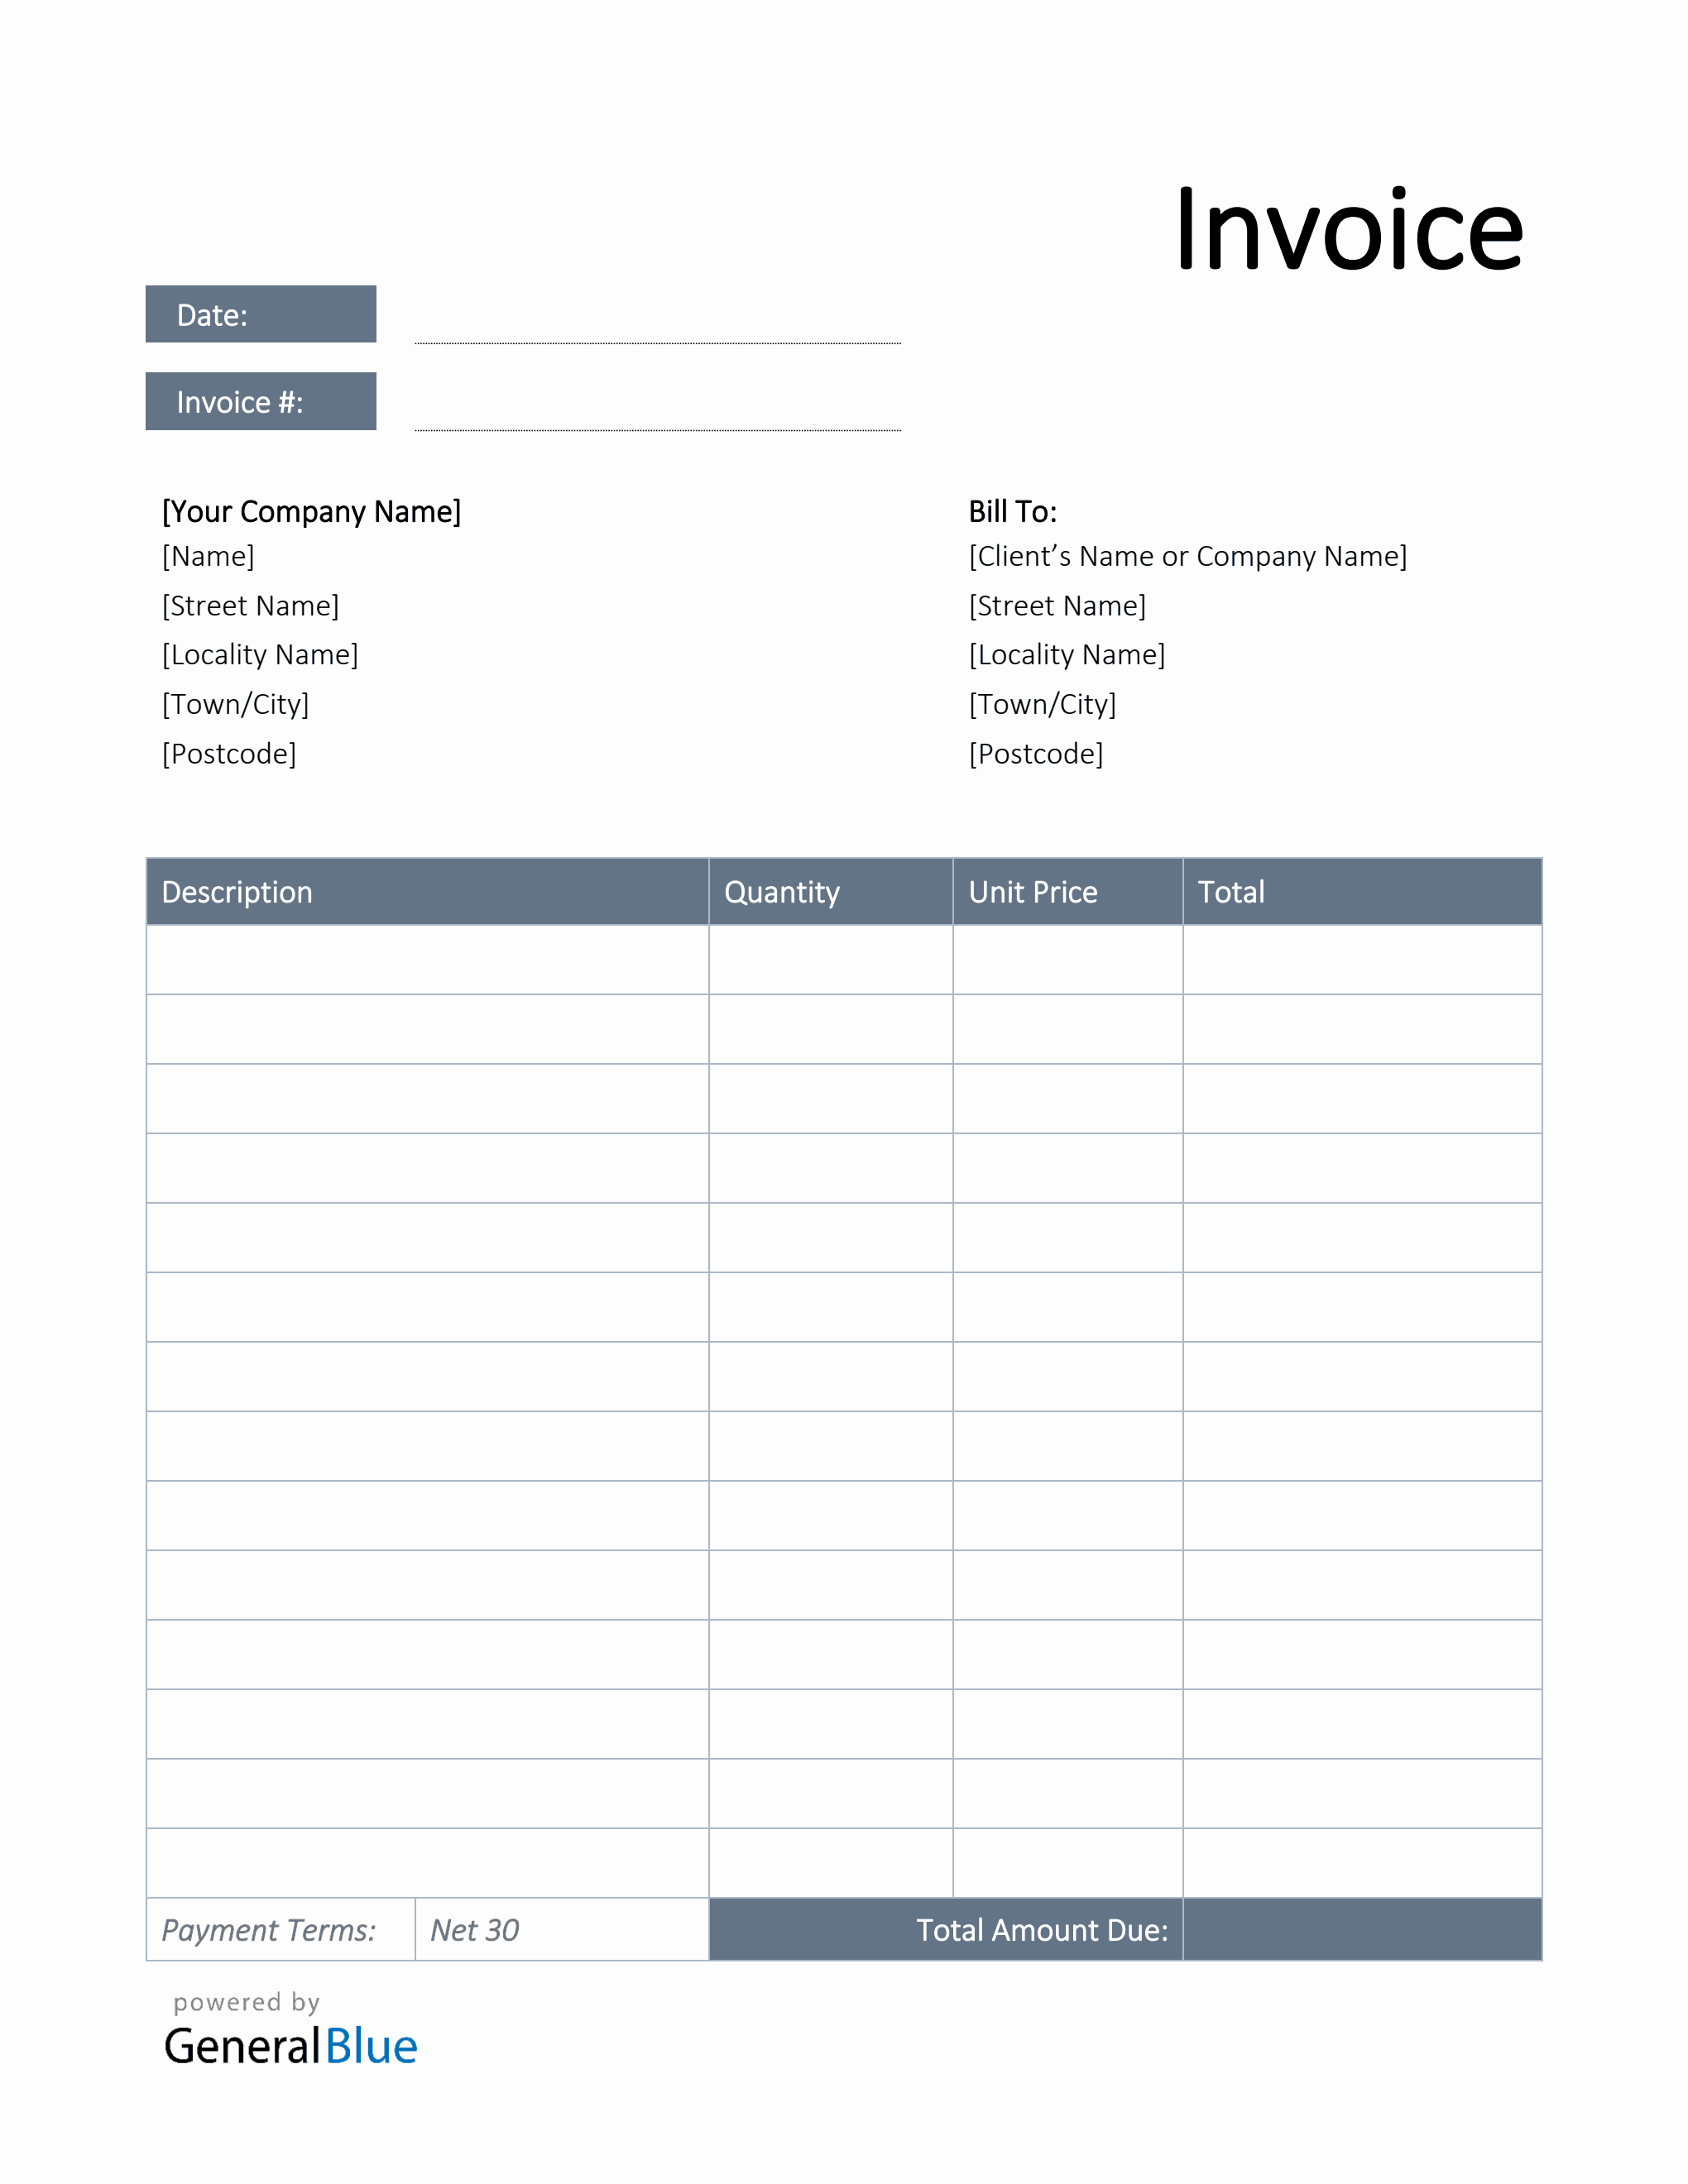 Invoice Template for U.K. in Word (Simple) Intended For Free Downloadable Invoice Template For Word